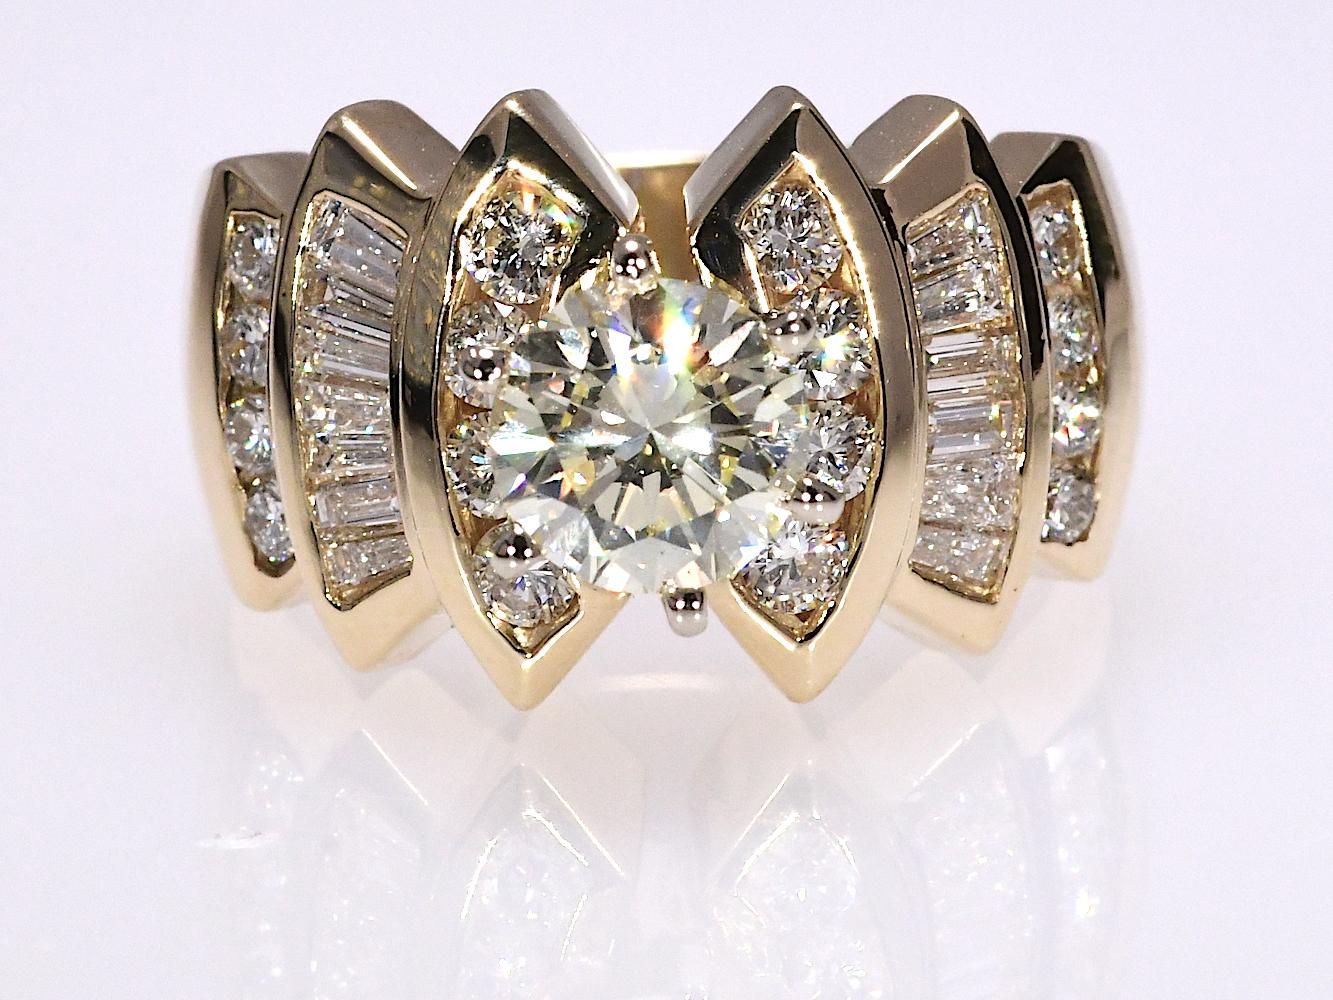 1.33 Carat Center 2.37 TCW Natural Diamond Ring in Yellow Gold 14K 

Stones: Natural Diamond    Center: 1.33 Carat  Cut: Round   Color: OP   Clarity: SI1    TCW:  2.37   Cut: Round, Baguette  
Metal: Yellow Gold 
Purity: 14K 
Style: Cluster Side